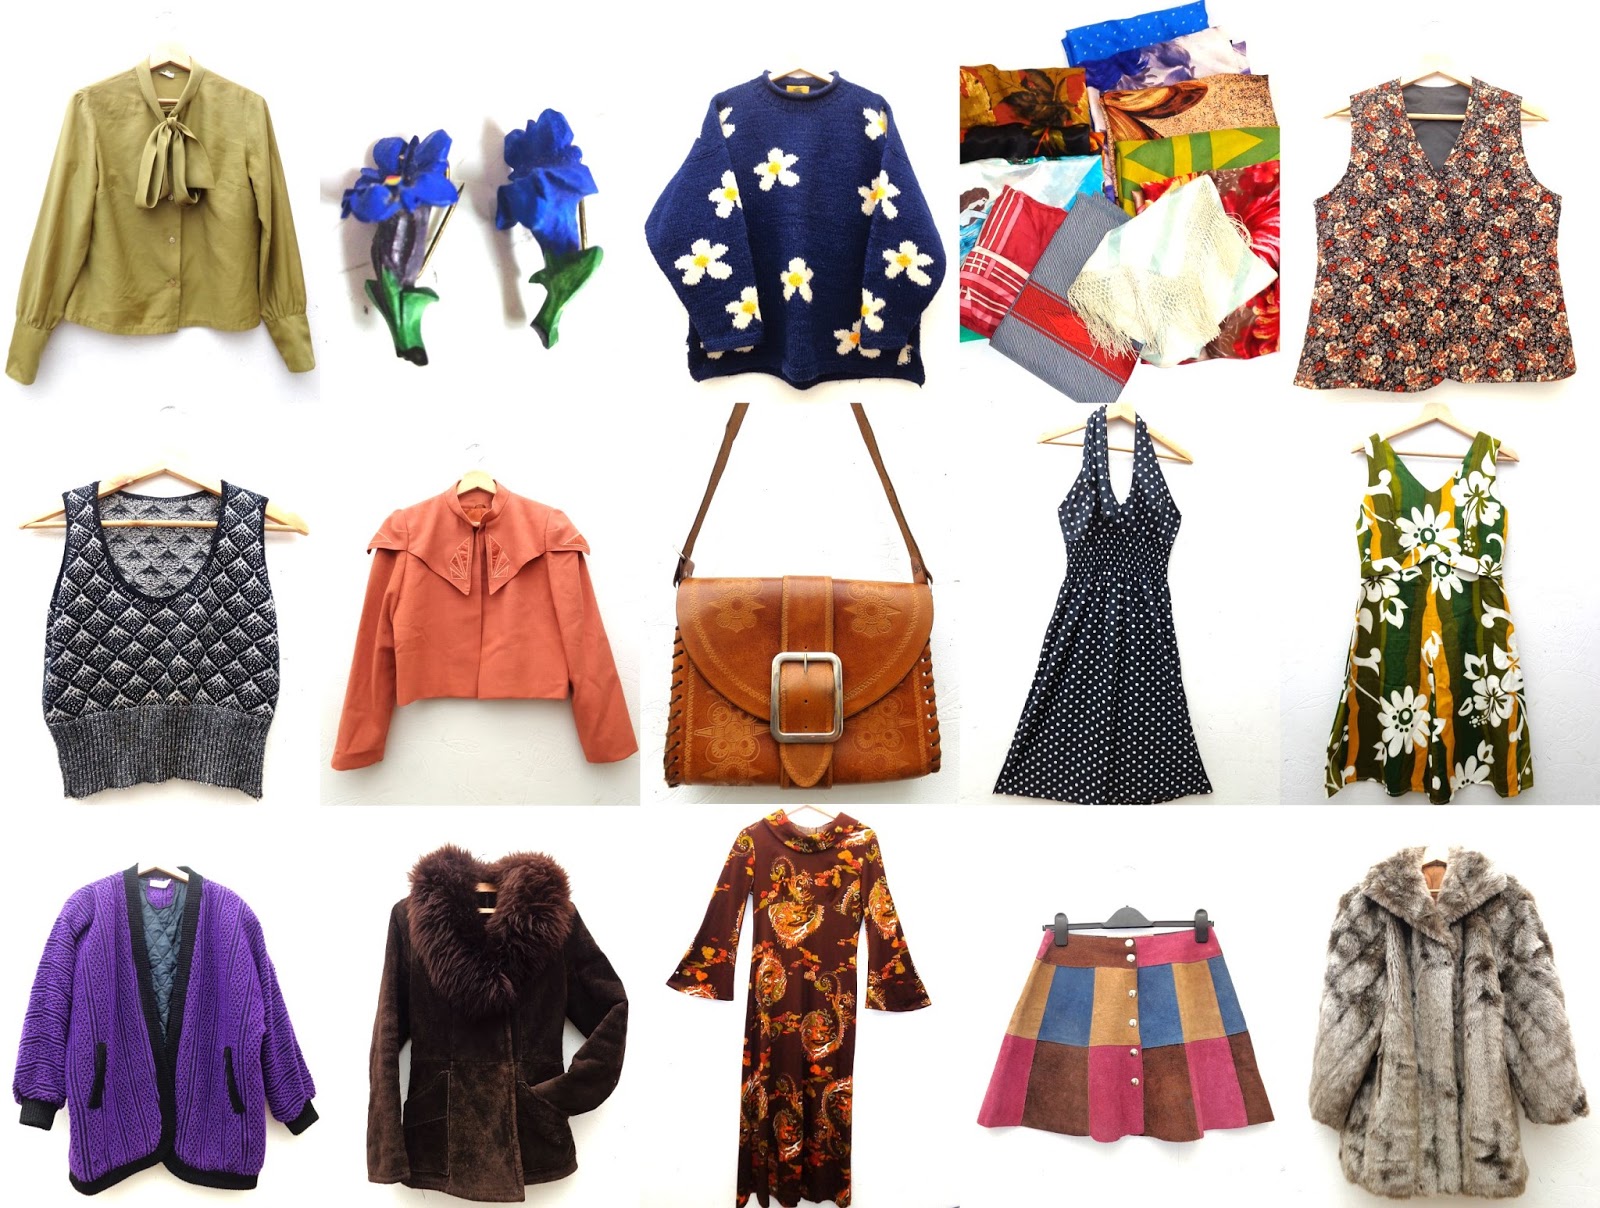 Vintage Vixen: My Vintage Life - Secondhand Shopping & Sewing